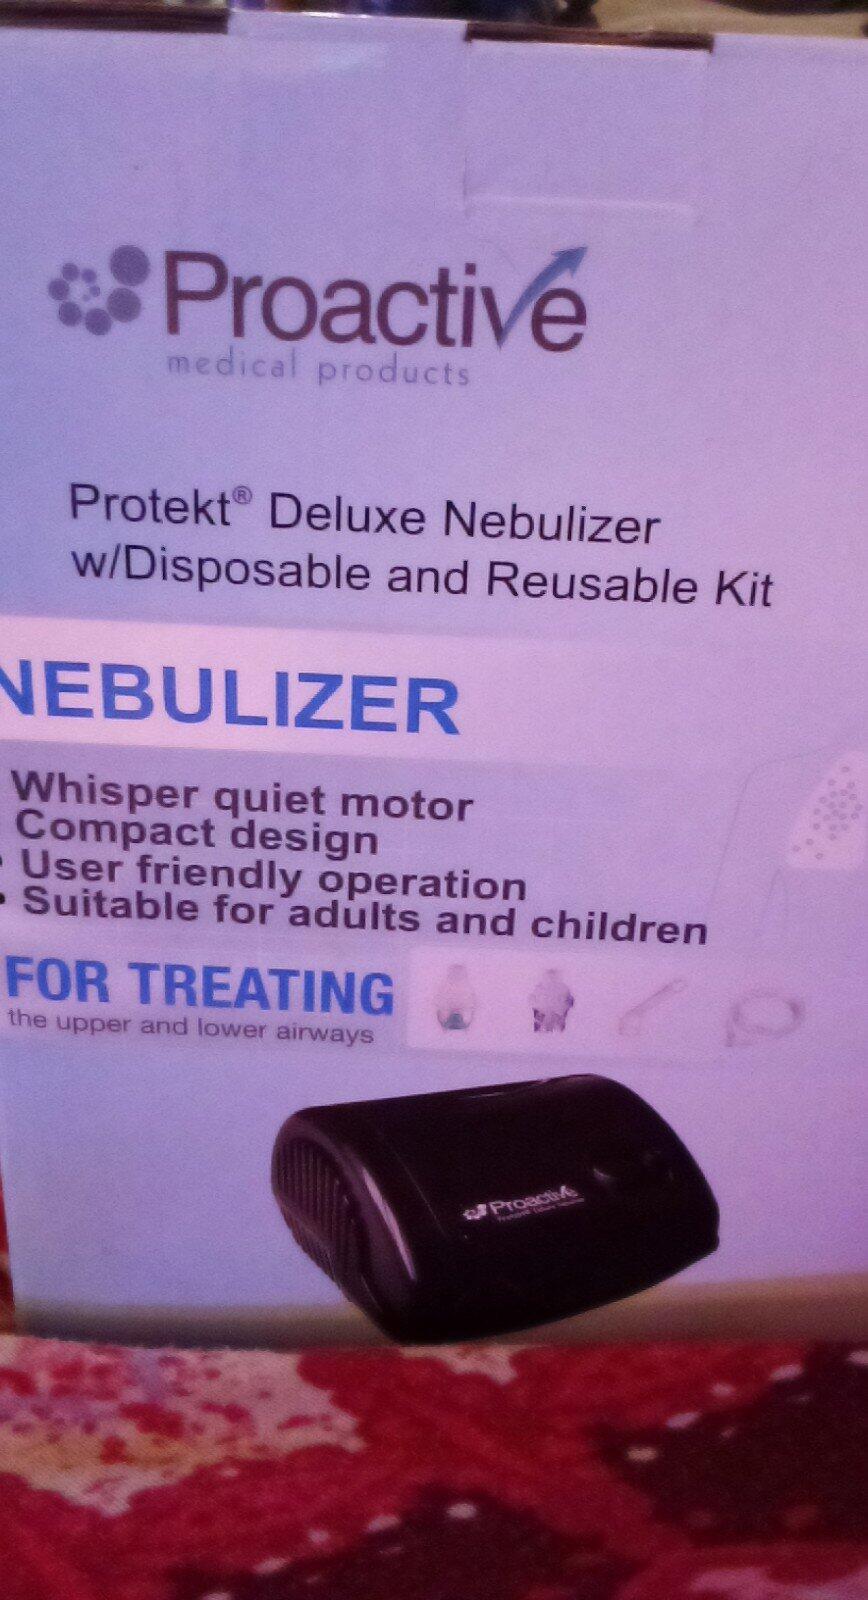 Protekt® Deluxe Nebulizer w/Disposable & Reusable Kit - Proactive Medical  Products